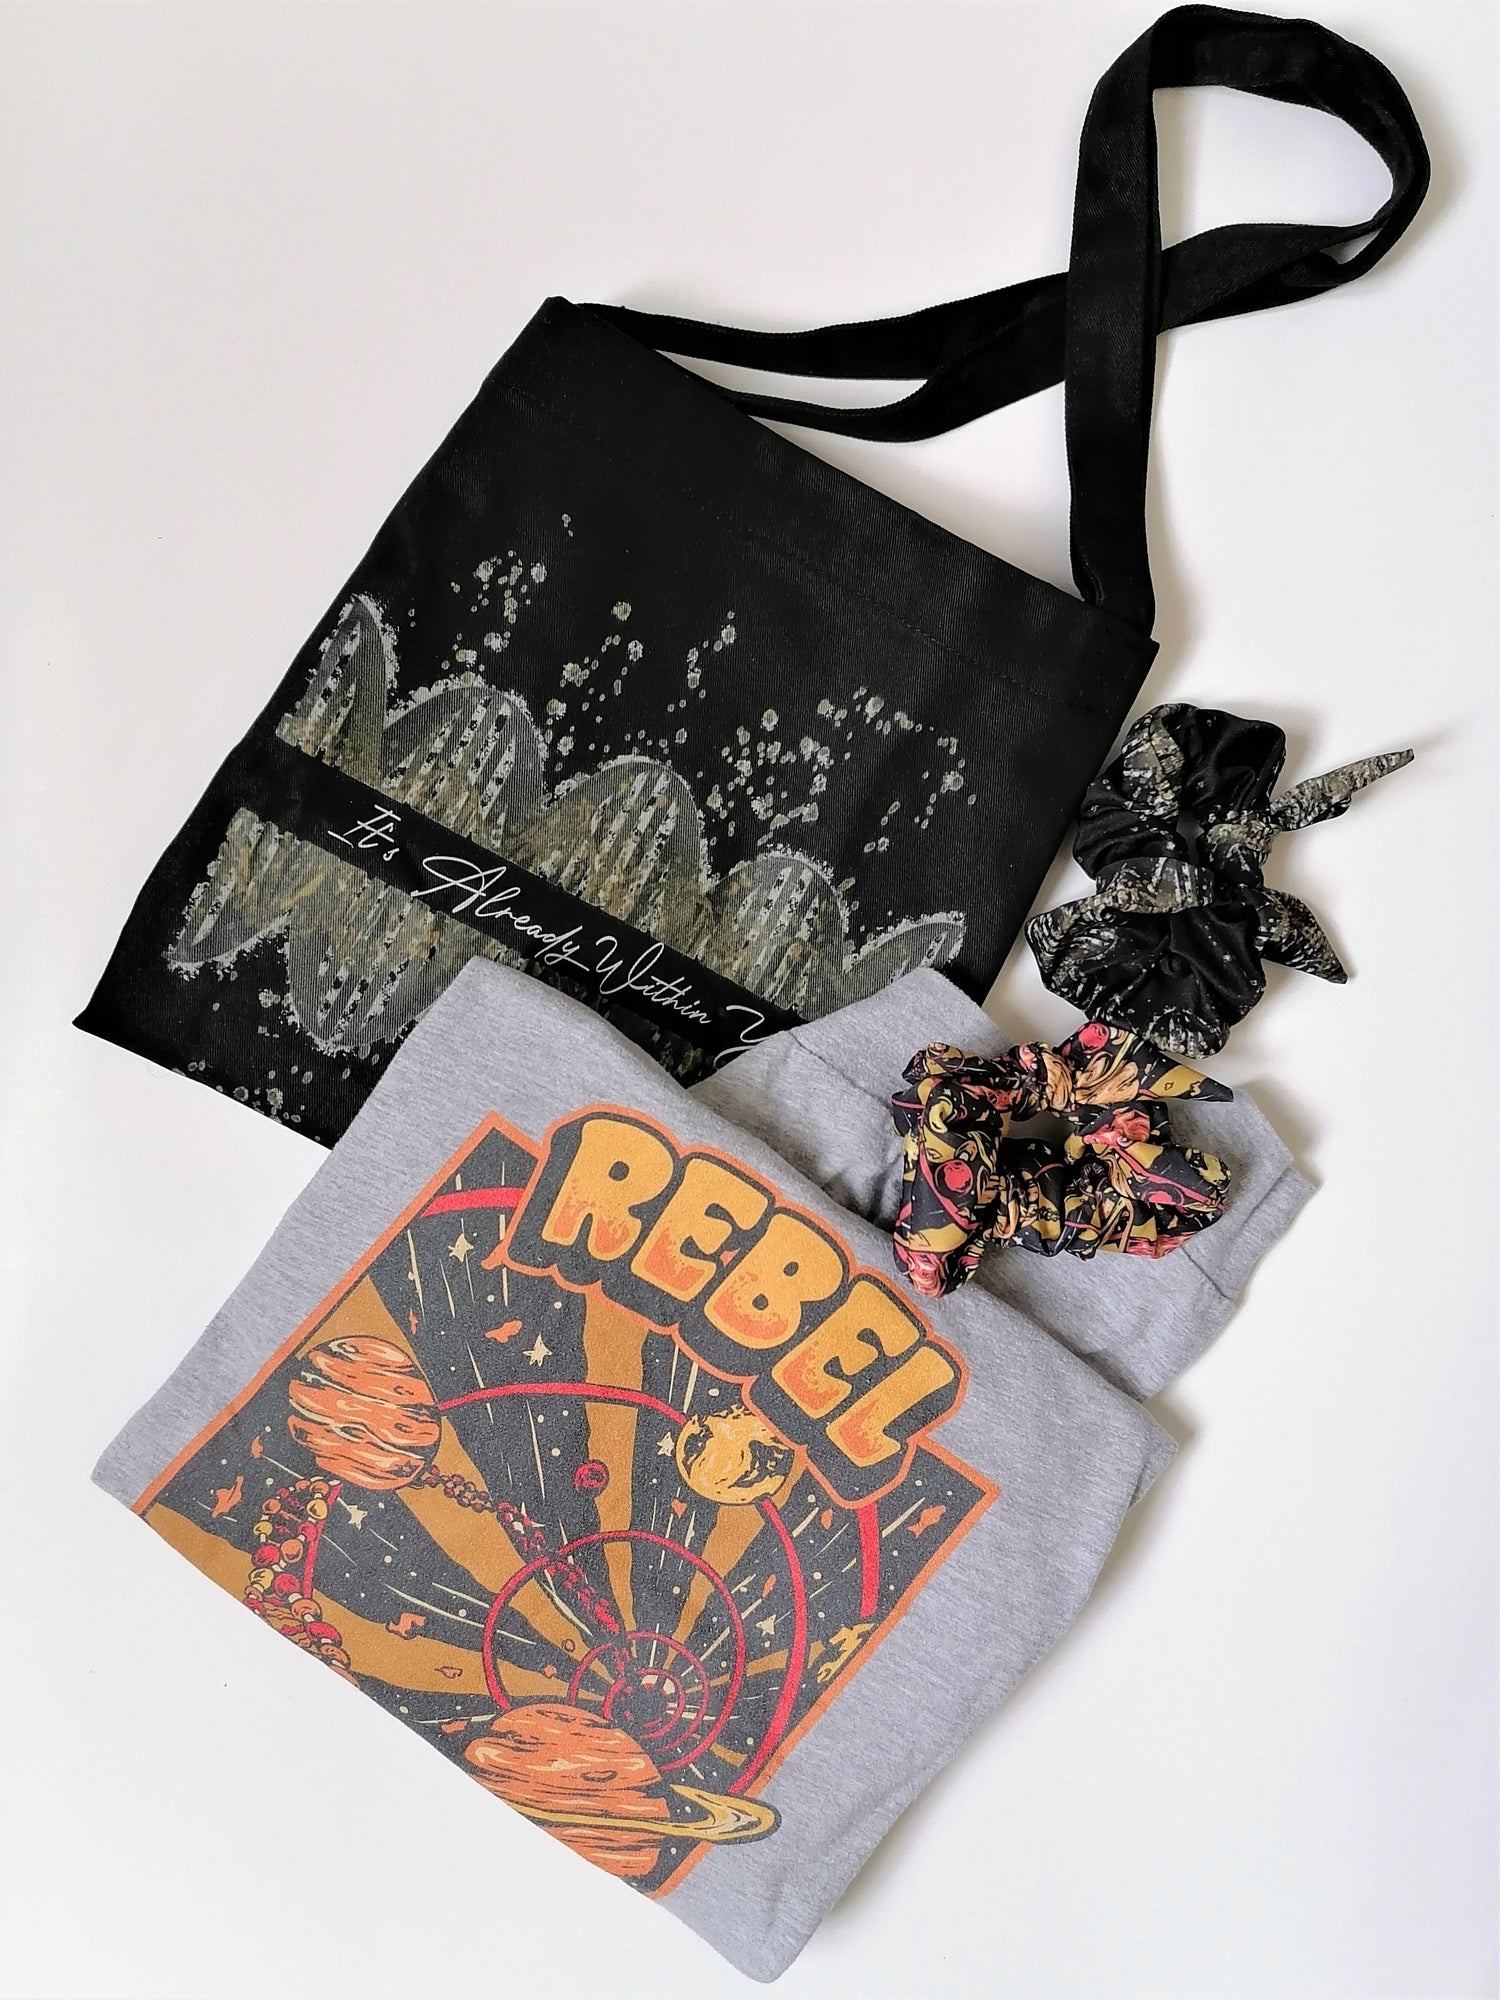 The Rebel Within You tote bag long sleeve shirt scrunchies